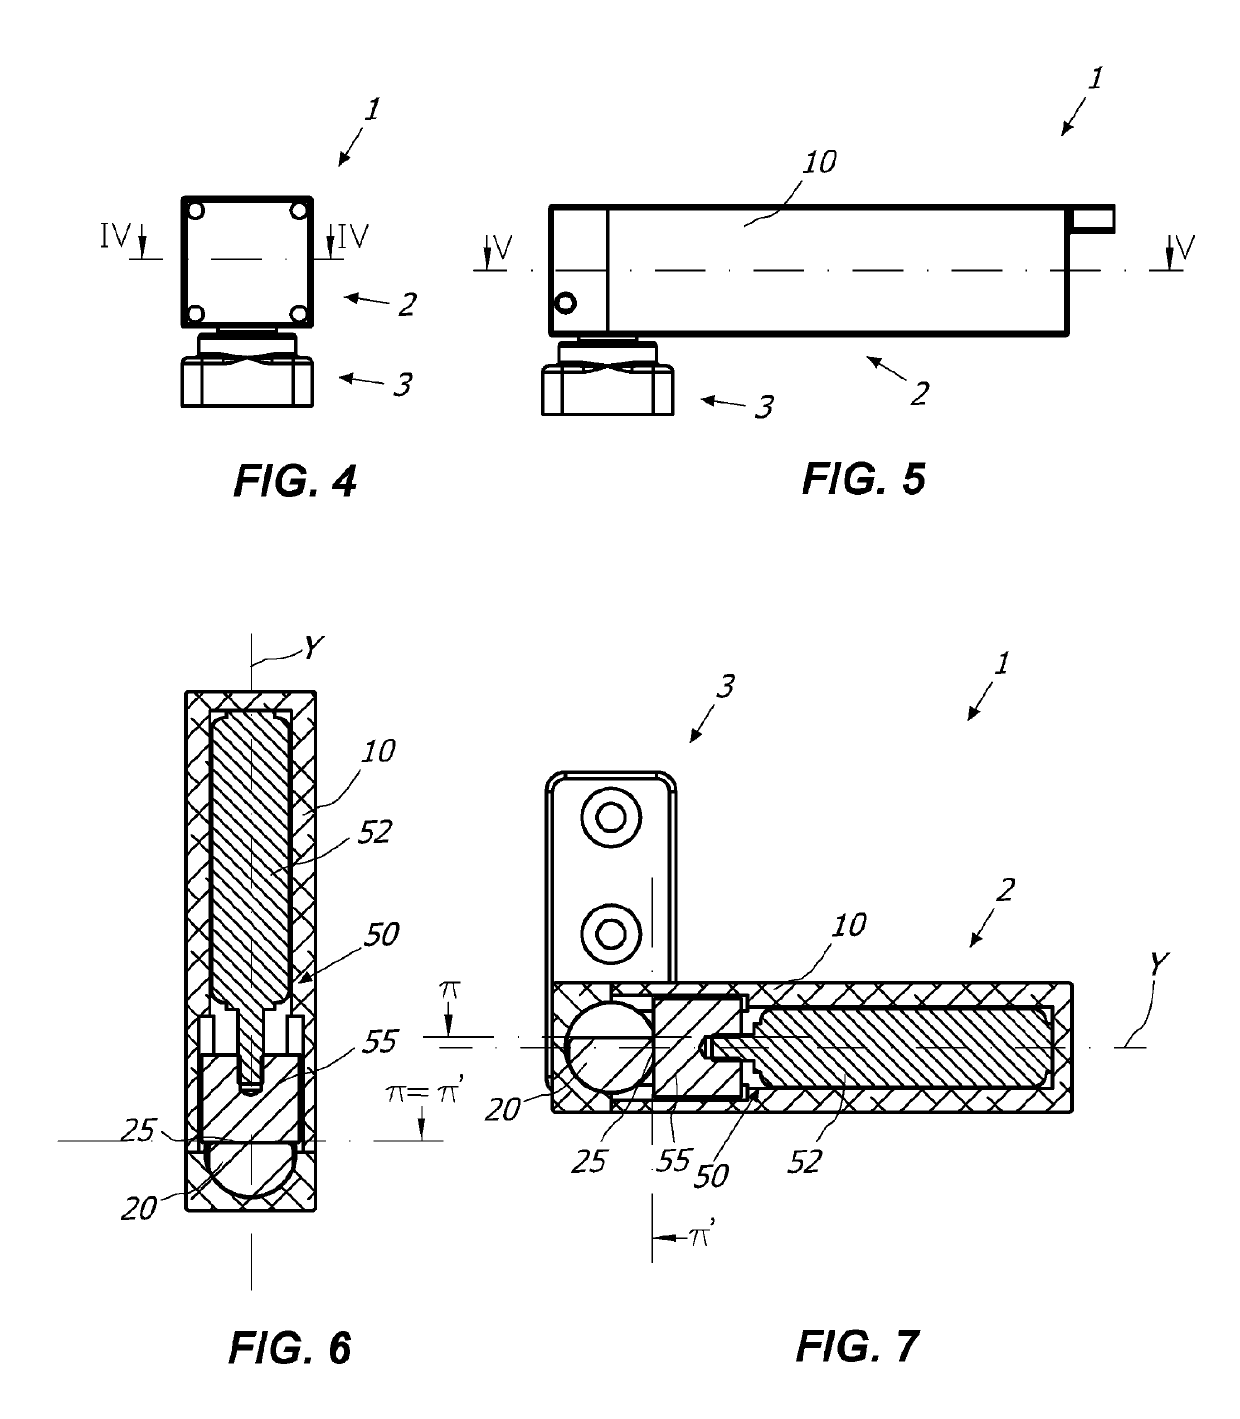 Hinge for the rotatable movement of a door, a shutter or the like